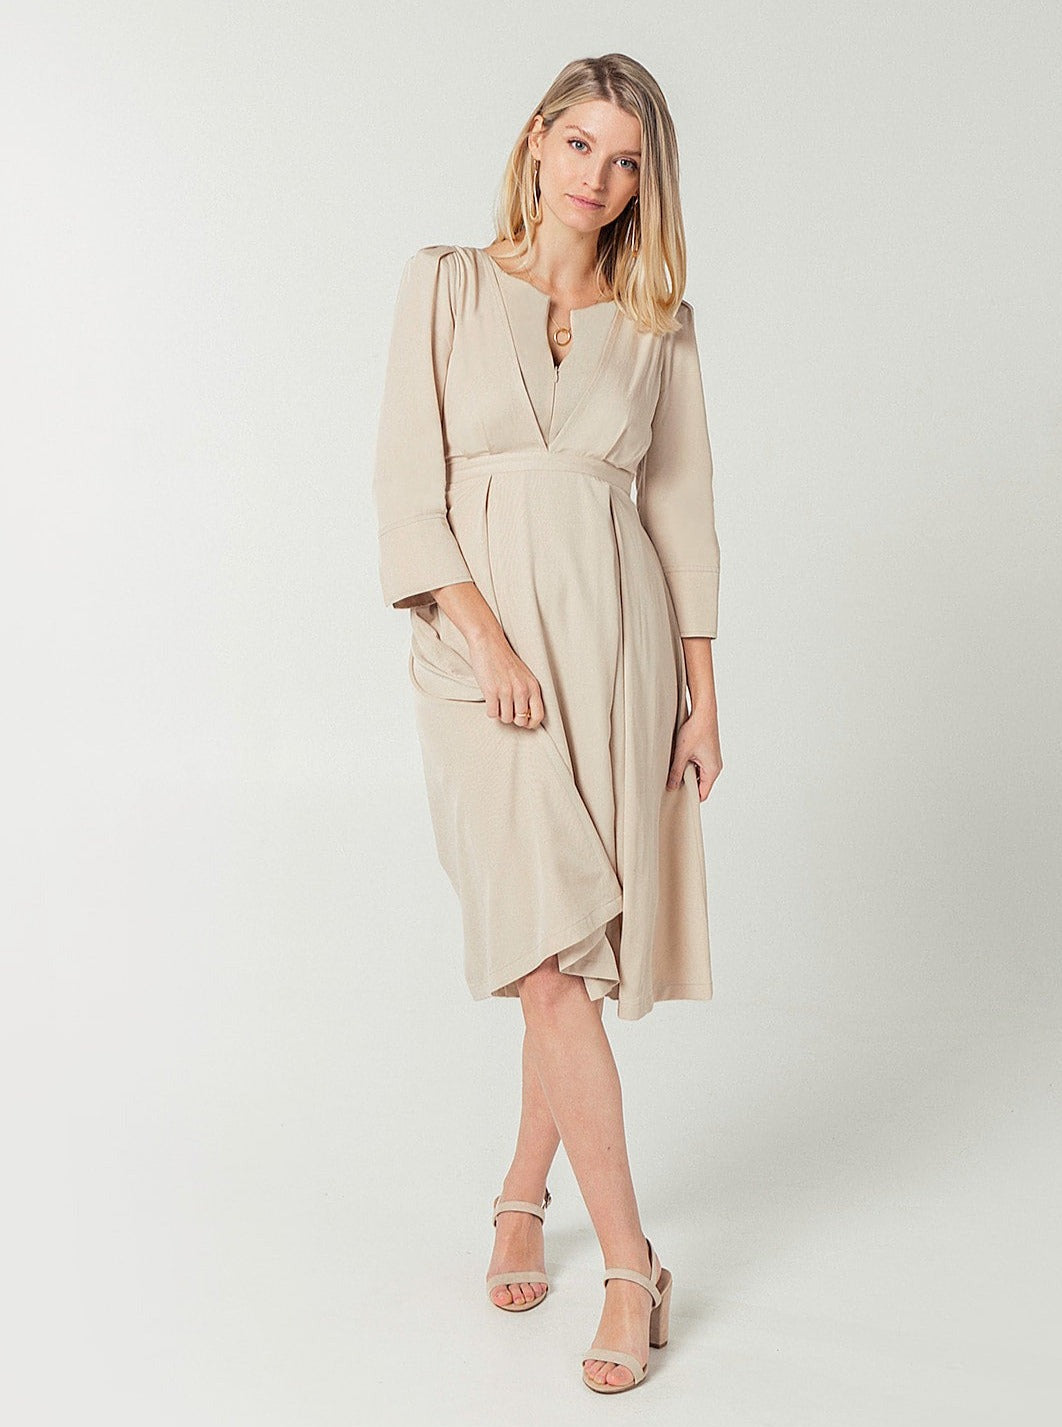 Nude maternity and breastfeeding dress for work, party, and event. TENCEL with empire waist, zipper nursing access, and full skirt with pockets. Sustainable. Beige.